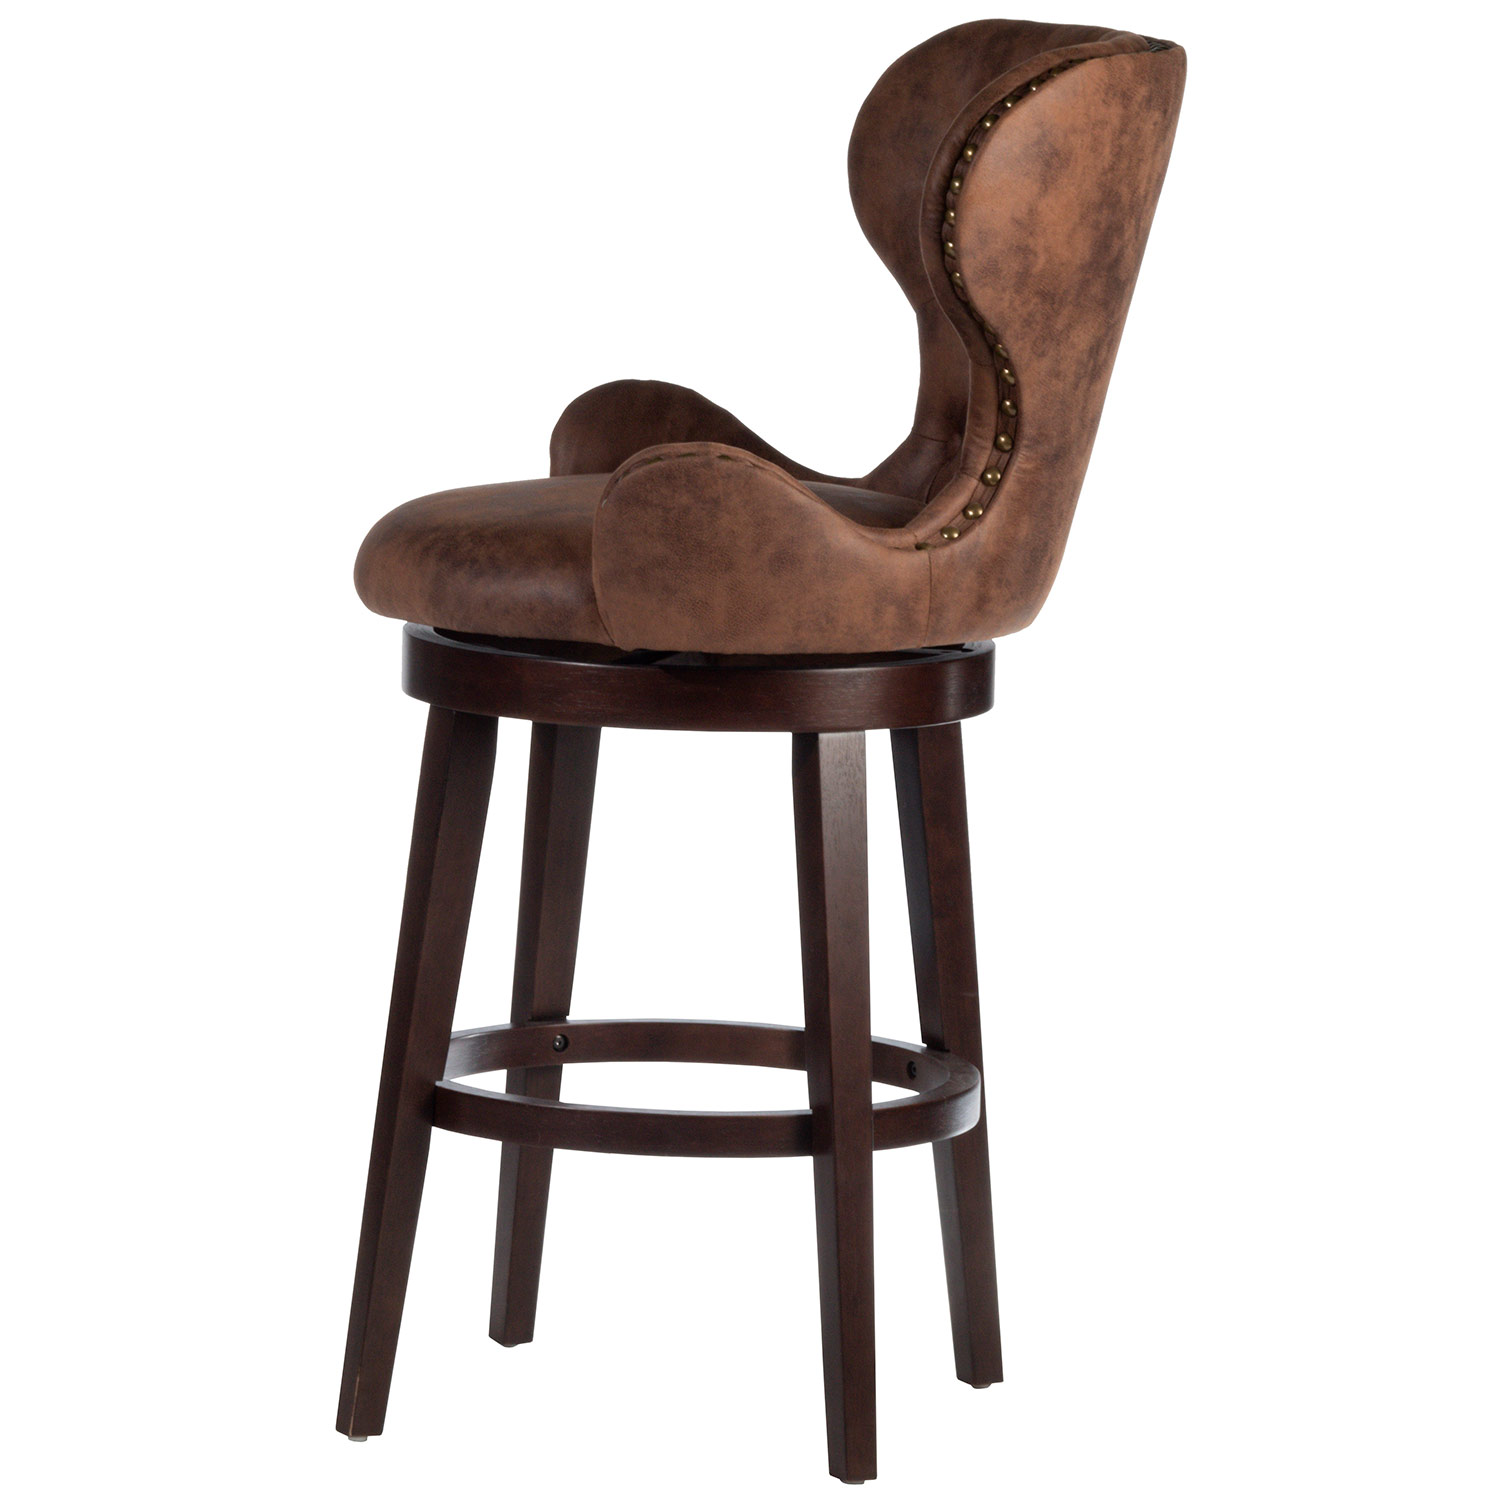 Hillsdale Mid-City Wood and Upholstered Swivel Bar Height Stool - Chocolate